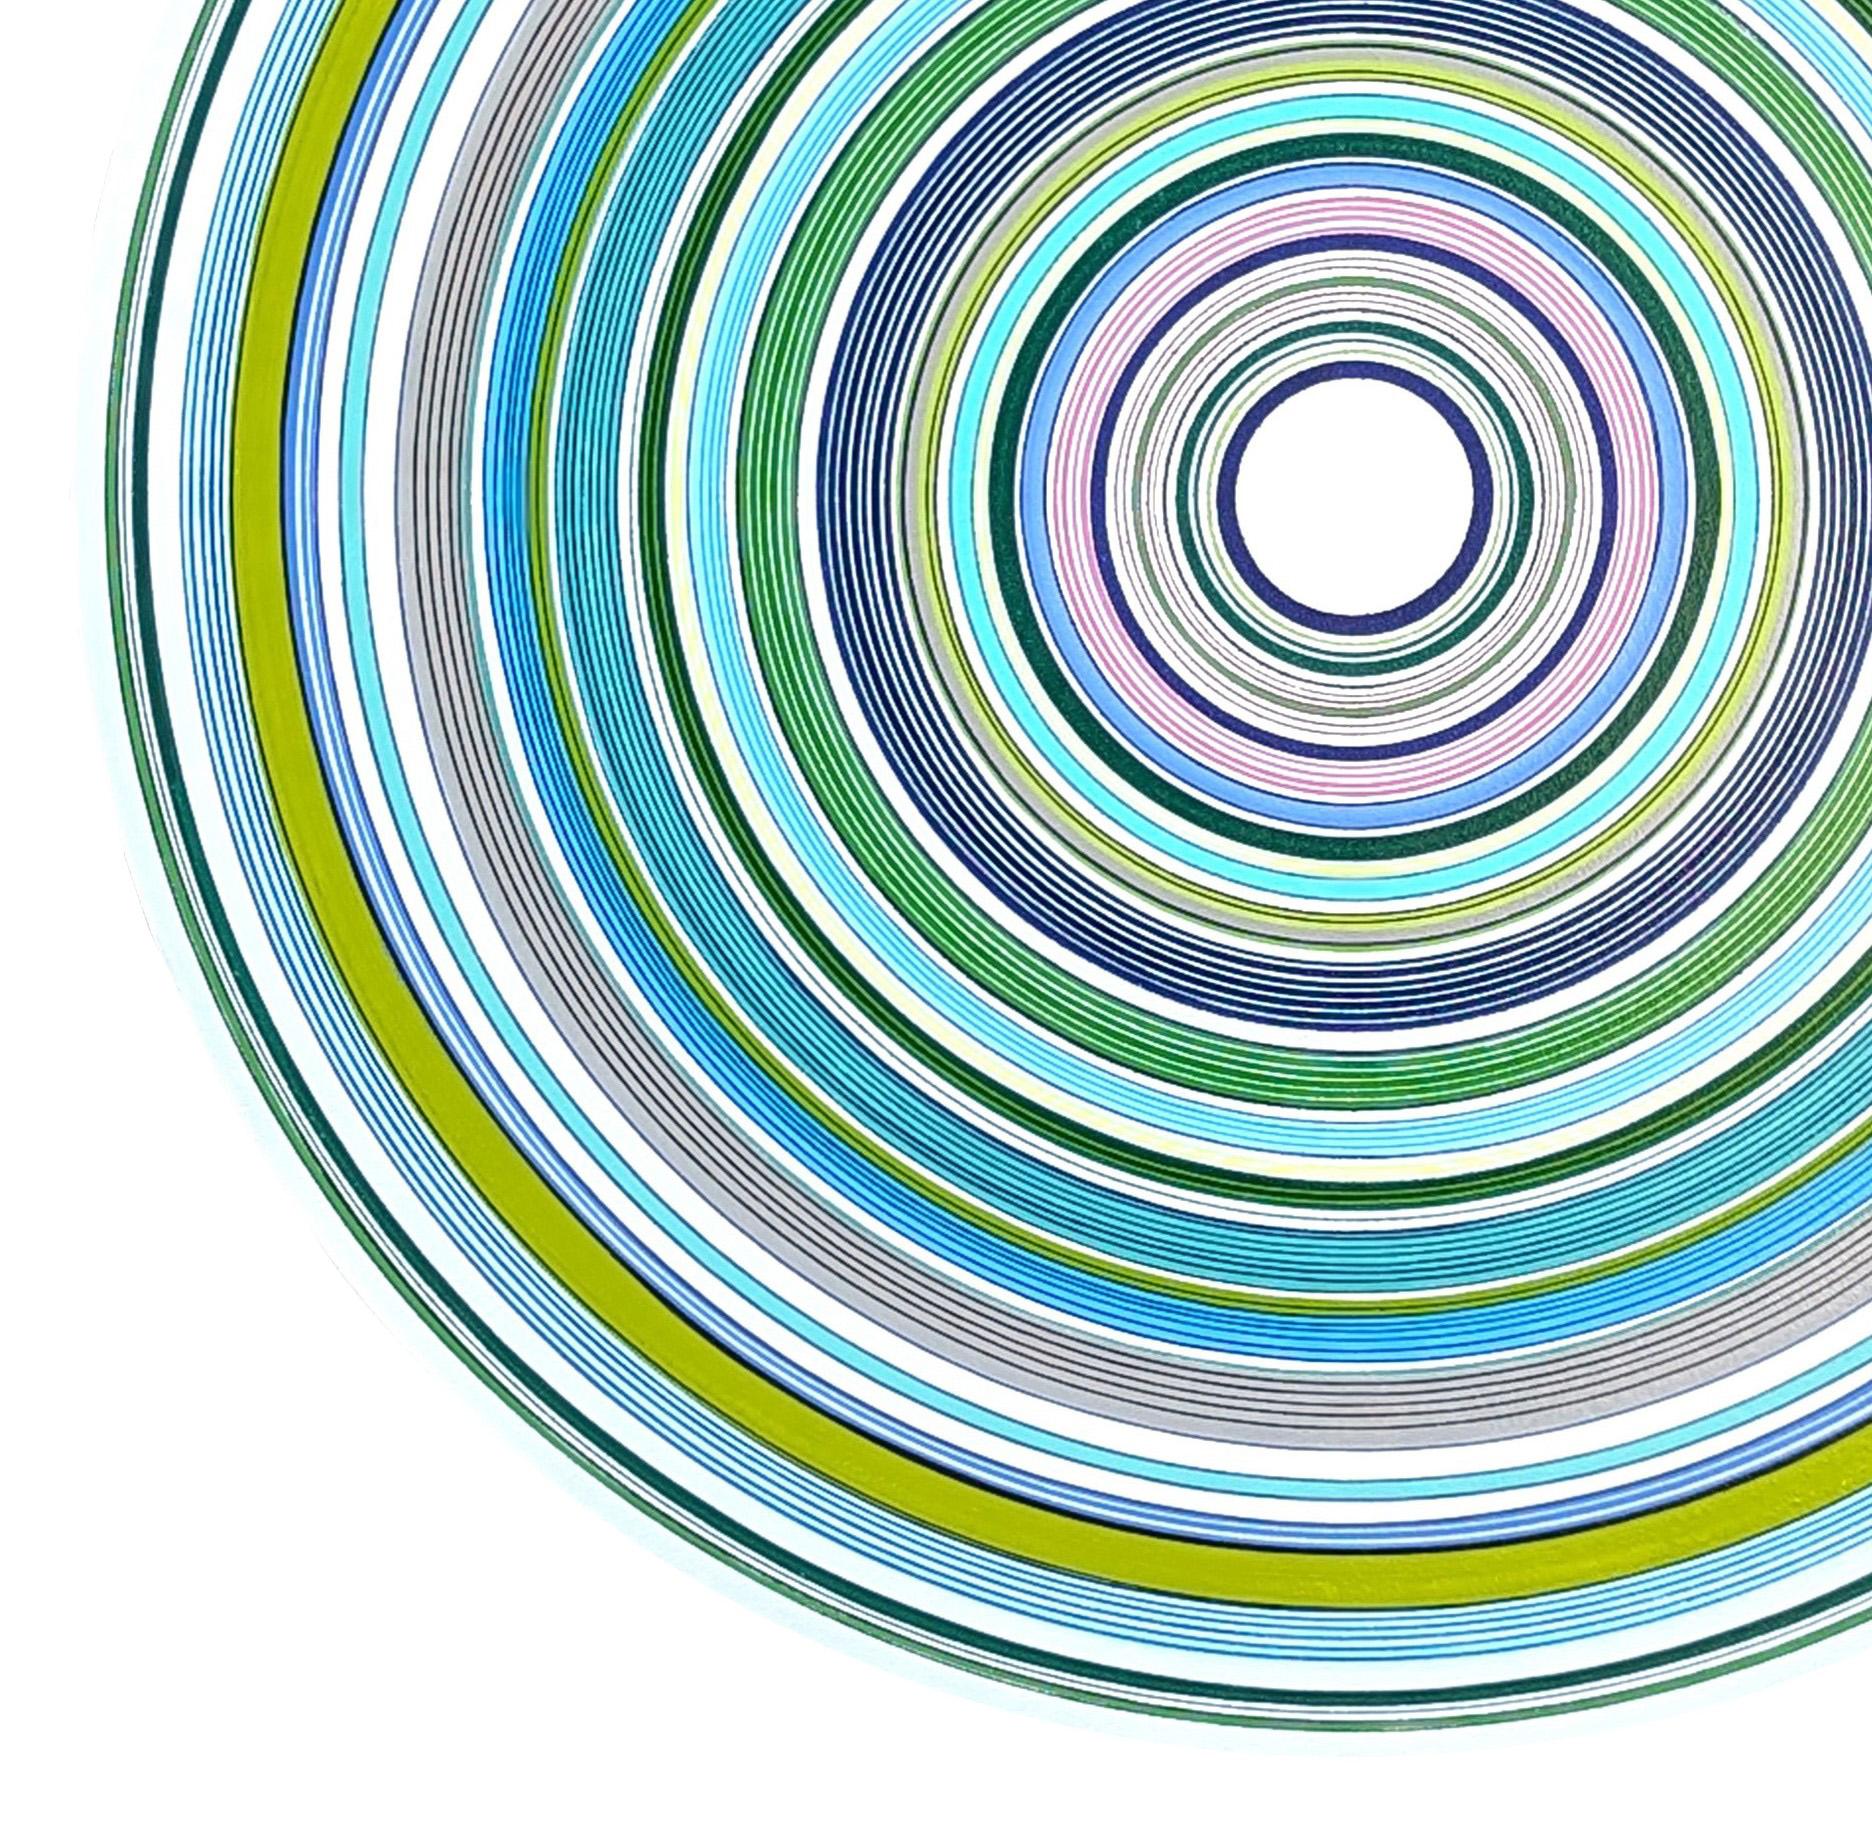 “Year of Love” Contemporary Blue, Green, and Navy Concentric Circle Painting 3